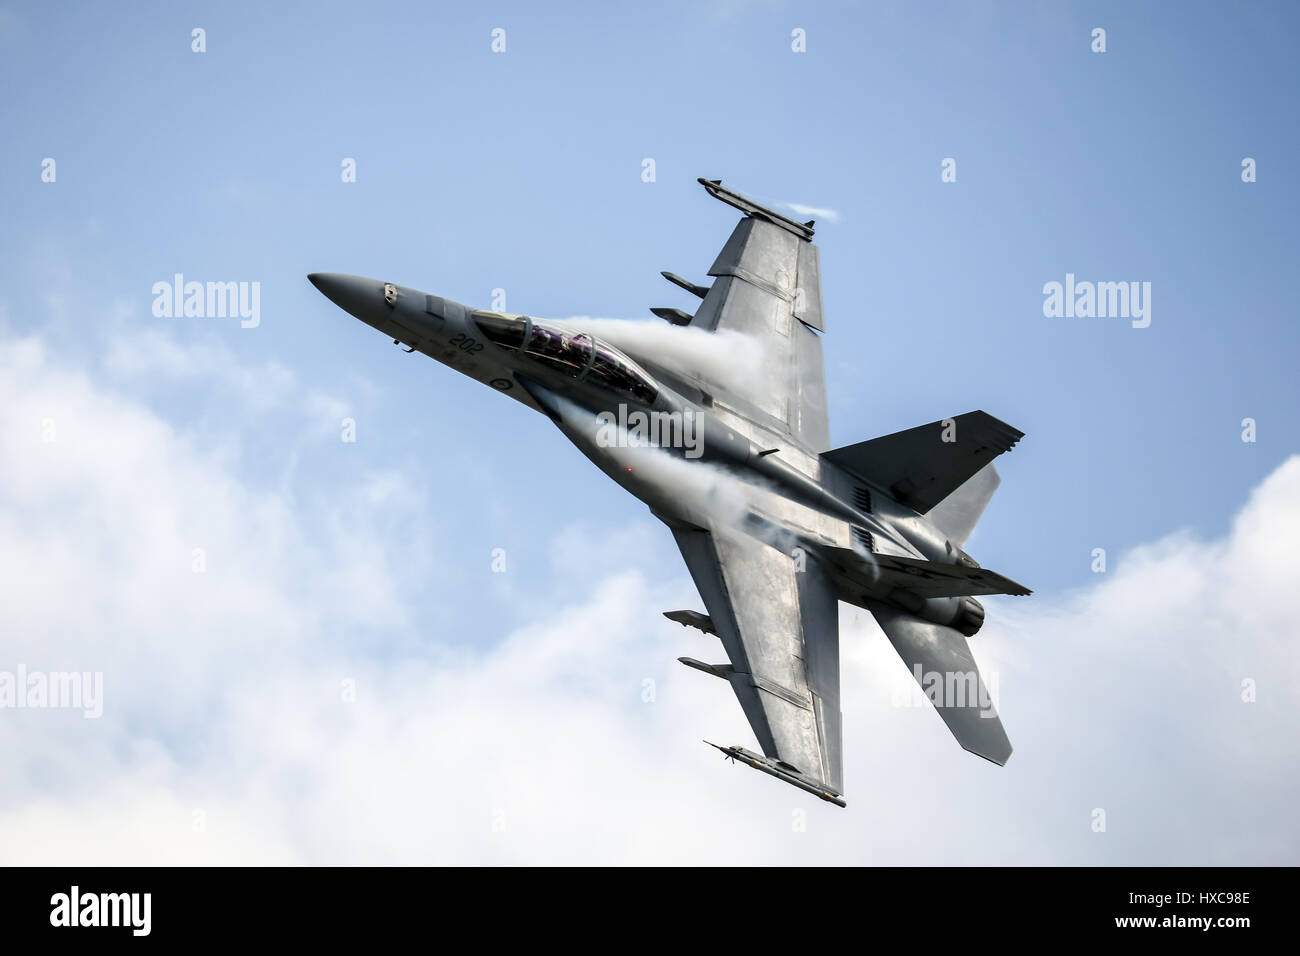 MELBOURNE, AUSTRALIA - MARCH 25: An Royal Australian Air Force FA18F Super Hornet performs in a public display above Melbourne on March 25, 2017 Stock Photo